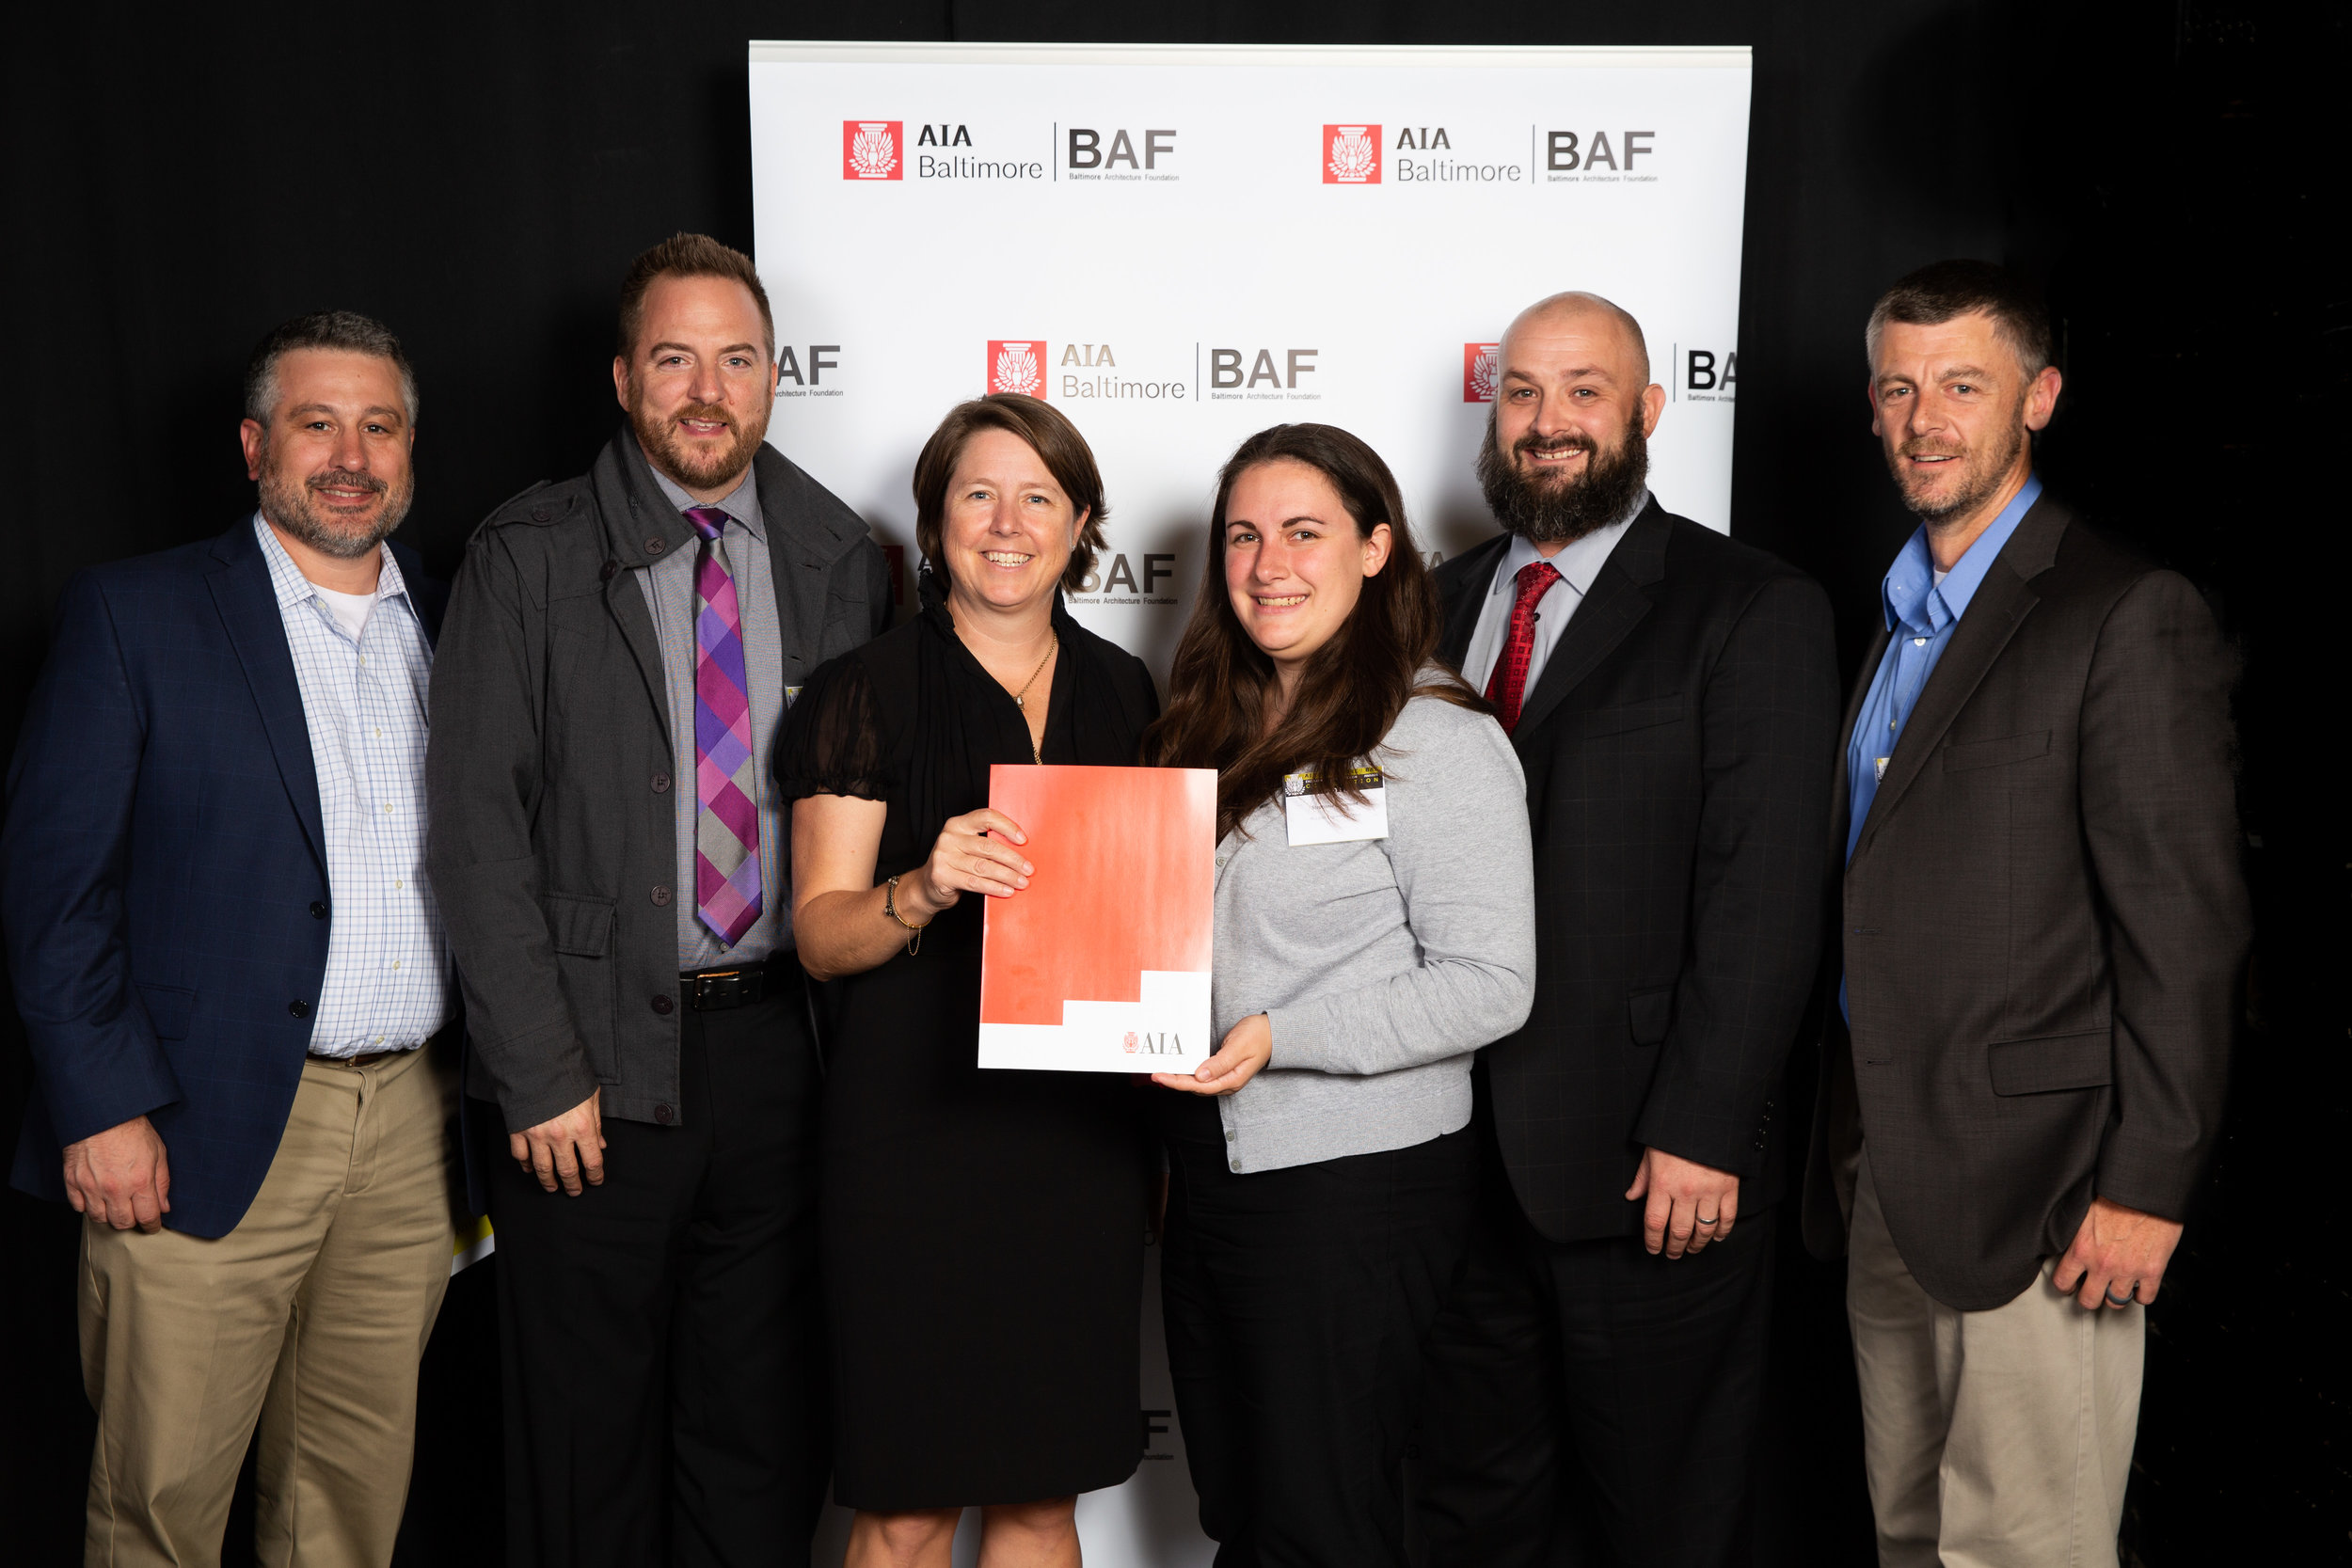 The project team displays its 2018 AIA Baltimore Design Award.